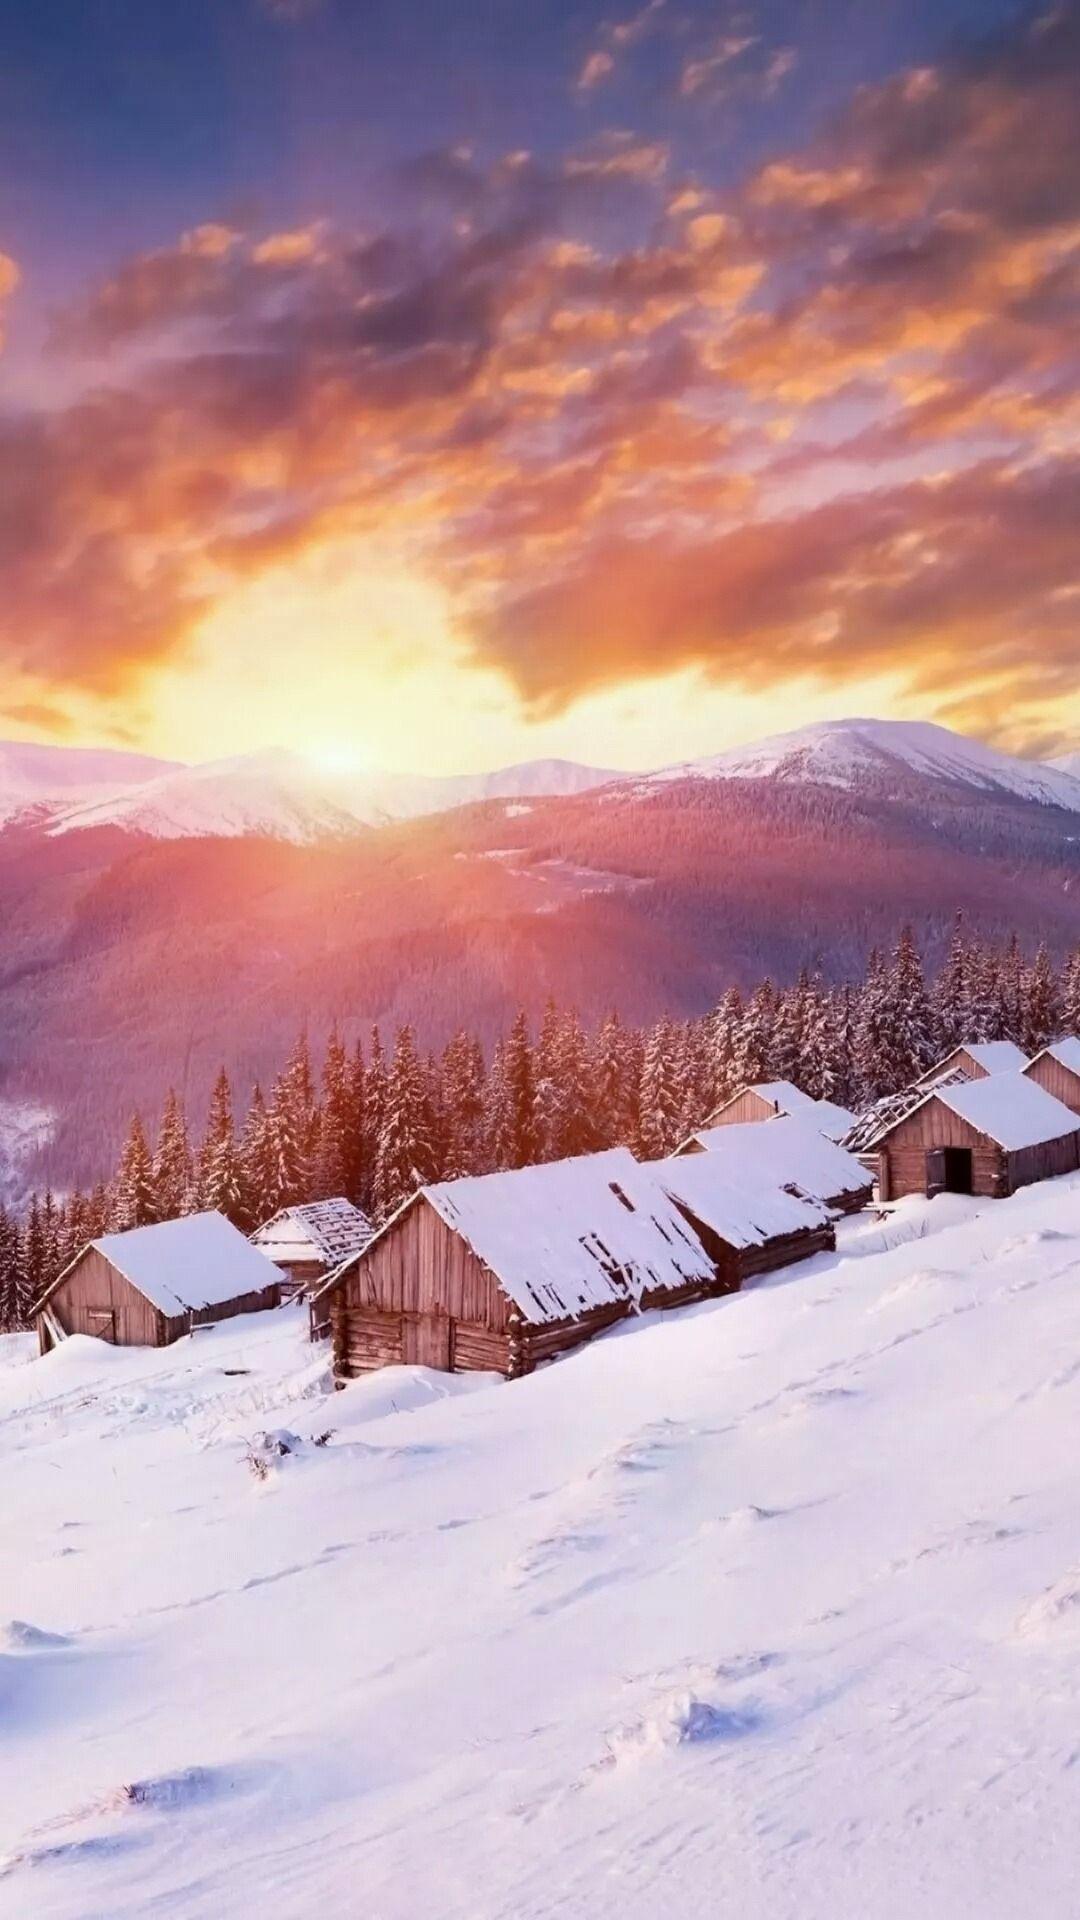 Winter Sunset Iphone Wallpapers Top Free Winter Sunset Iphone Backgrounds Wallpaperaccess